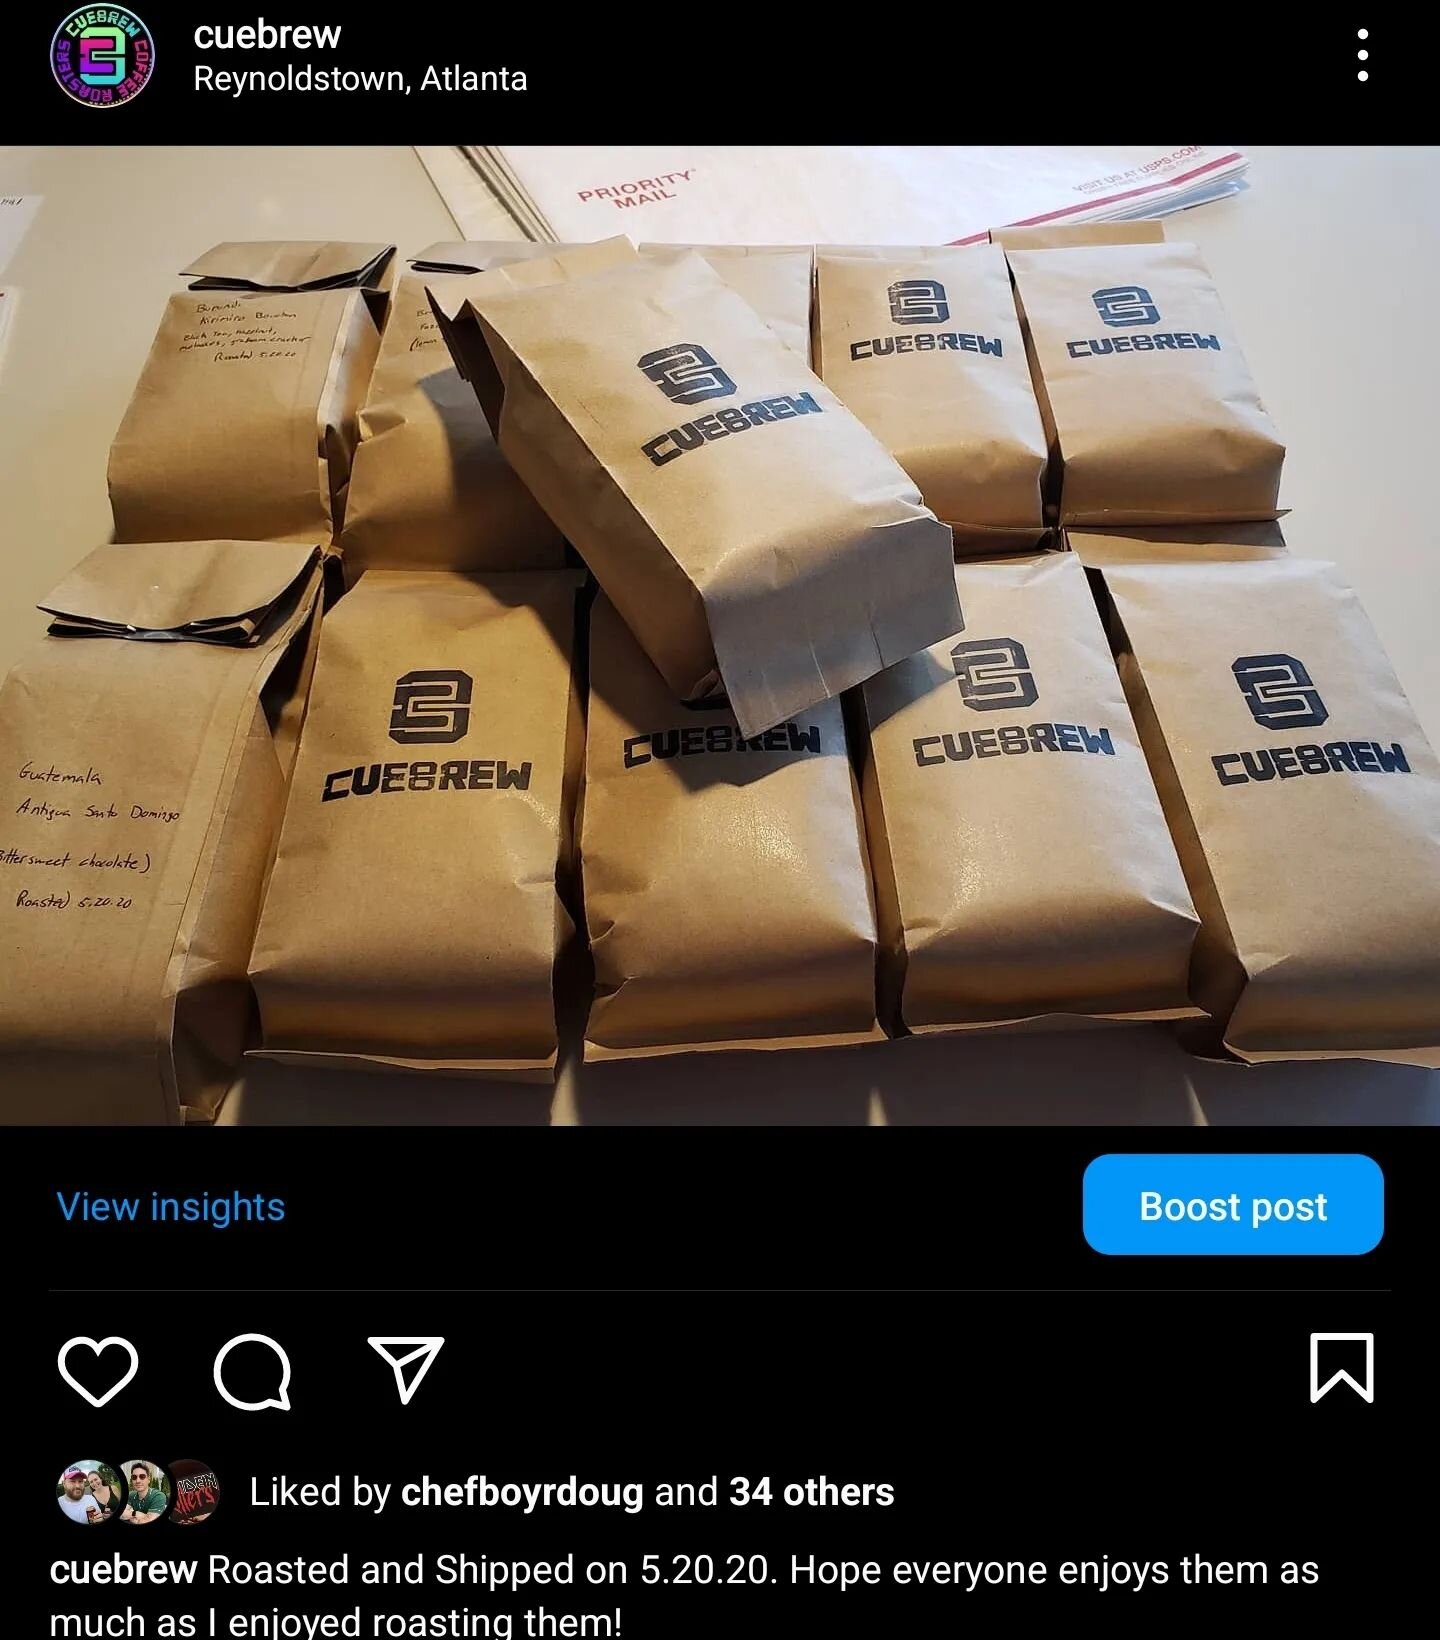 Toss back to our first big order on 5.20.20. The journey continues and so do new challenges and new milestones. We appreciate all of our supporters and coffee consumers. Some exciting news is coming, so stay tuned! In the mean time first time custome